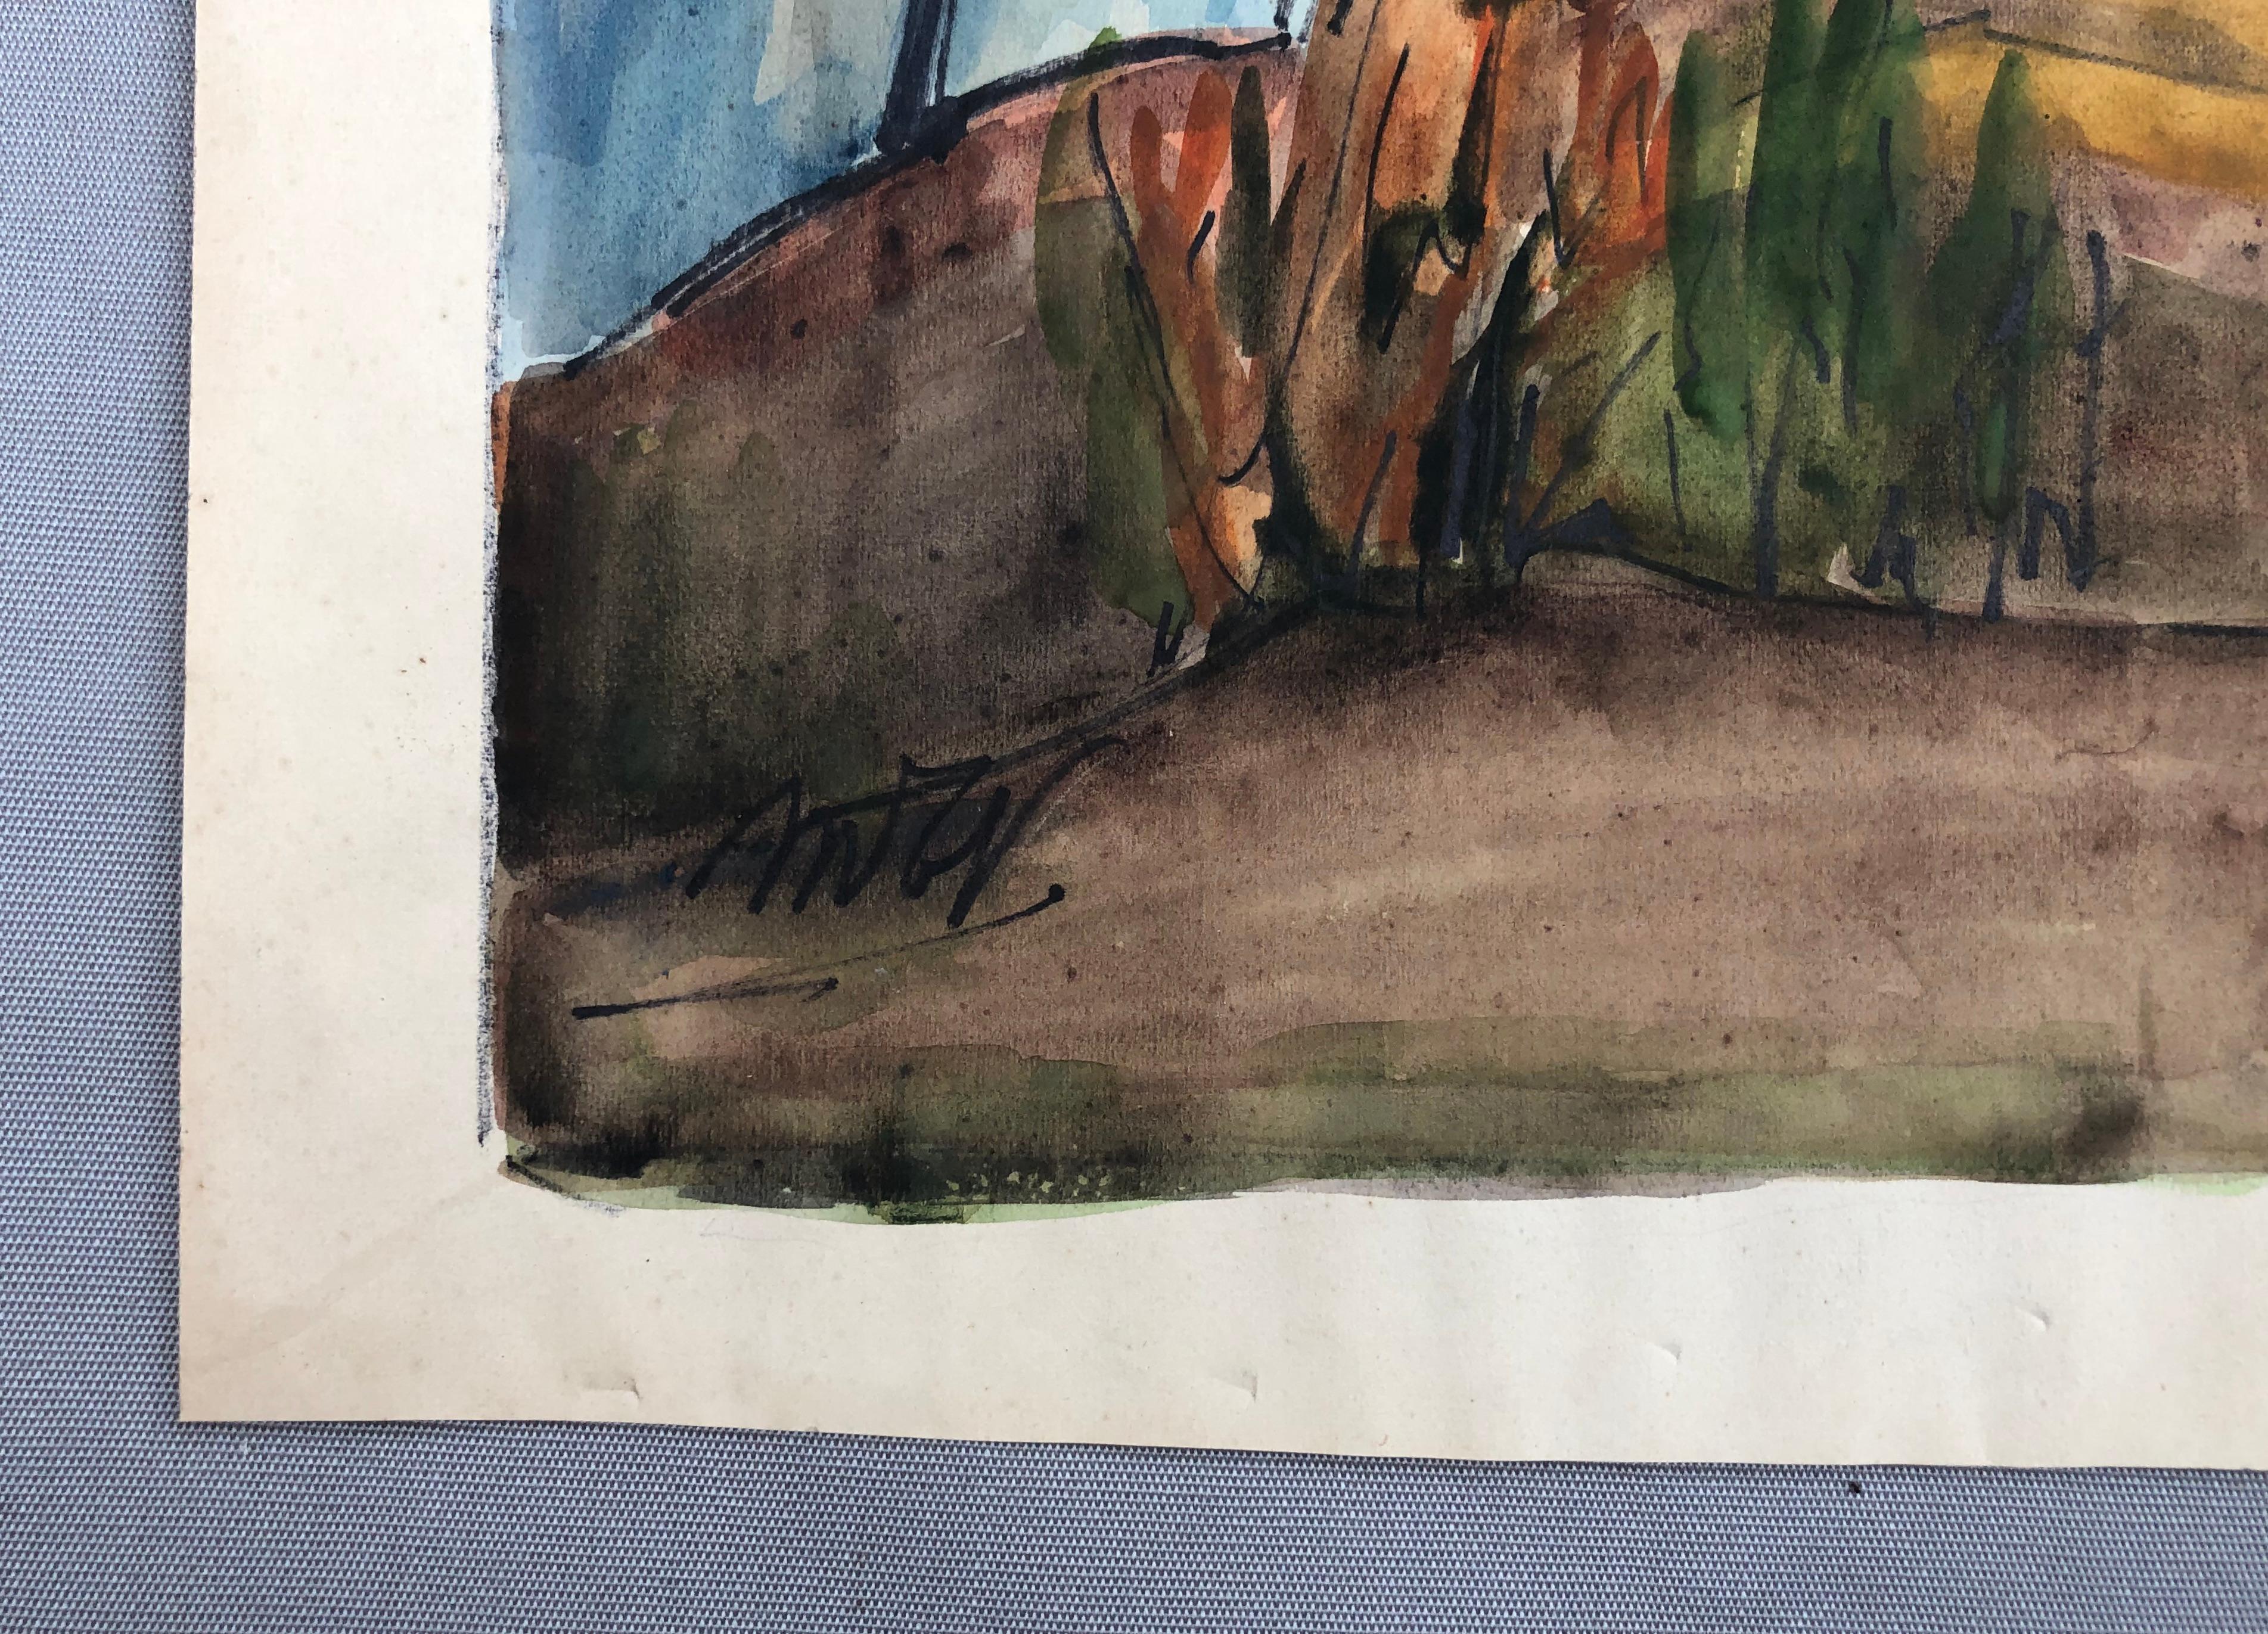 Pines.
20th century watercolor.
Signature to be identified.
69.5 x 55 cm